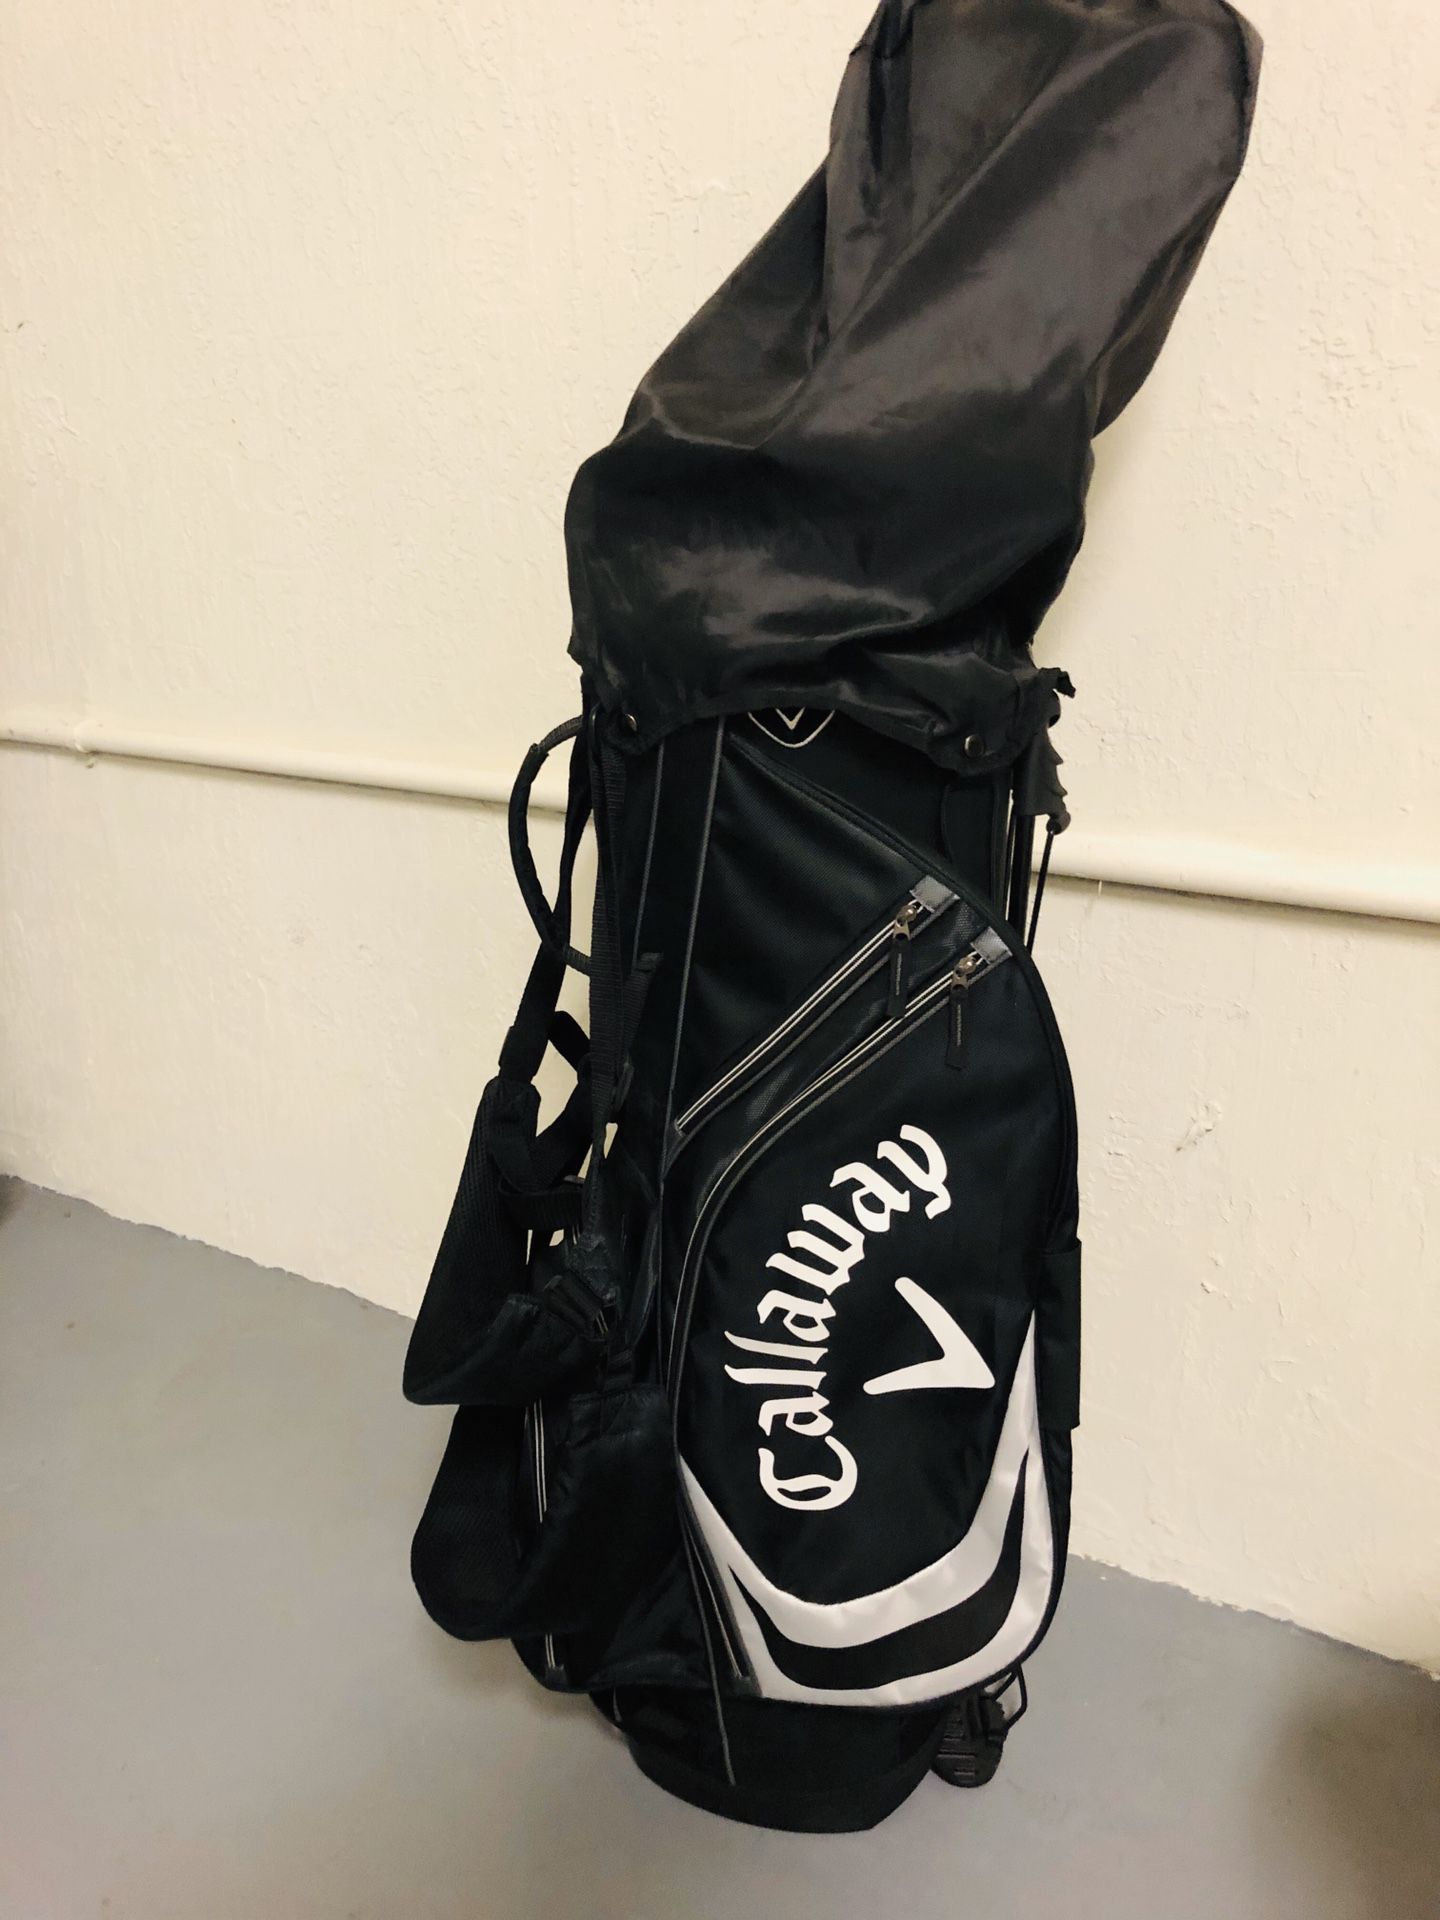 Callaway Gold Stand Bag